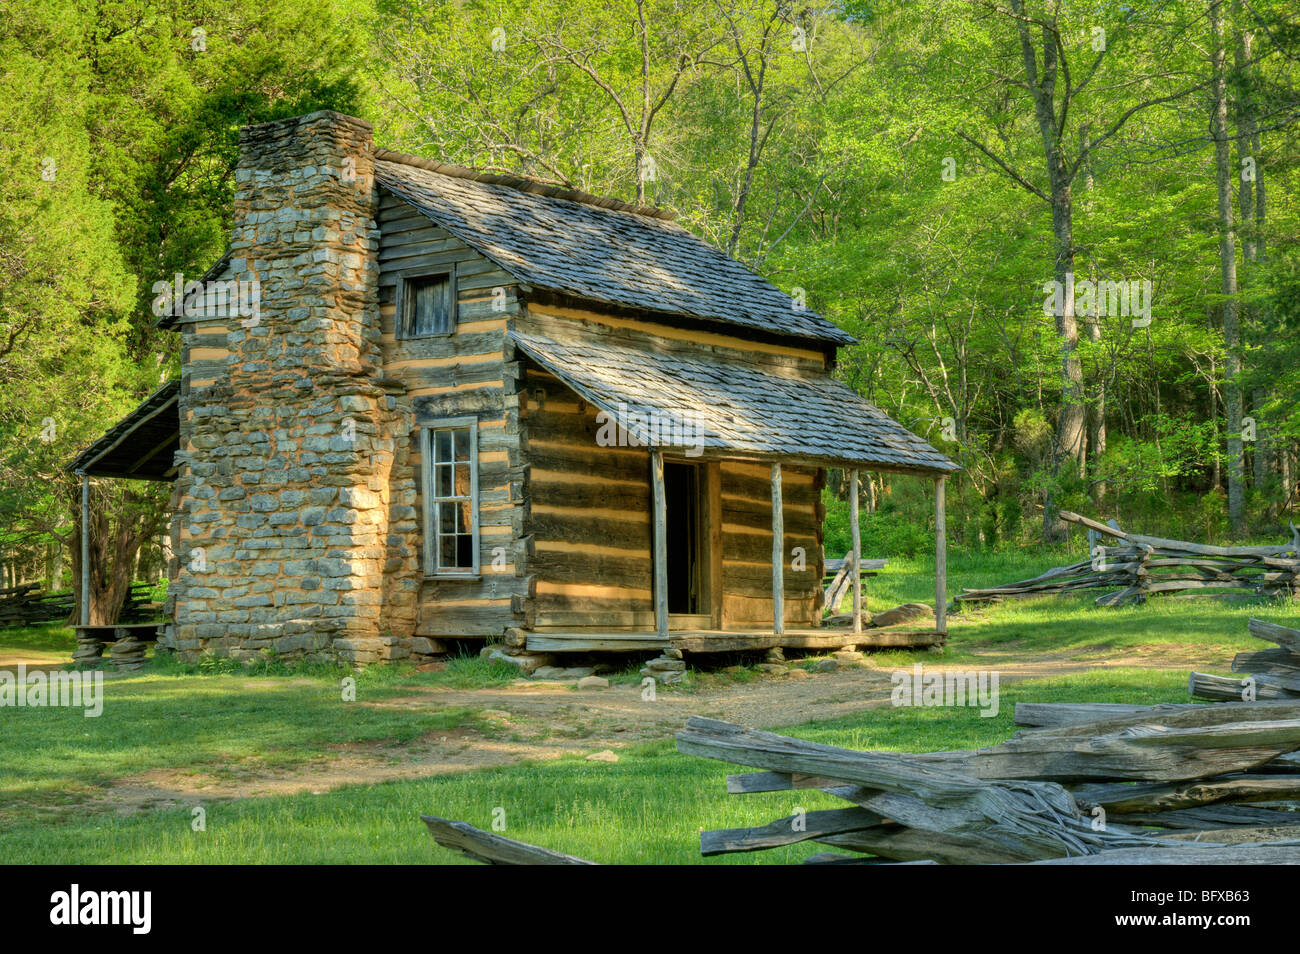 John Oliver's Cabin in Great Smoky Mountains National Park, Tennessee, USA.  Photo by Darrell Young. Stock Photo